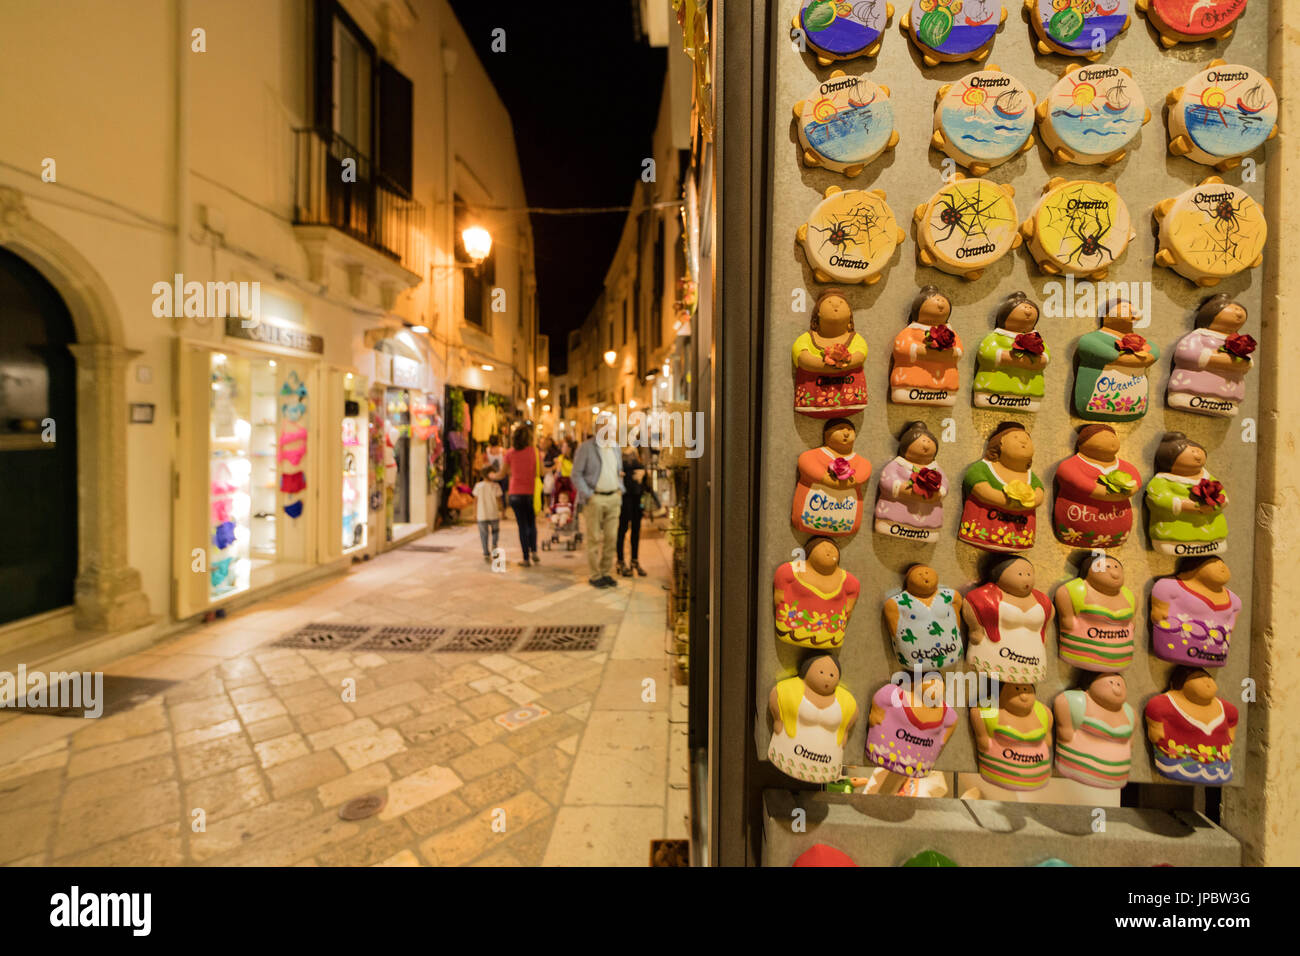 Handmade souvenirs and crafts in the alley of the old town Otranto province of Lecce Apulia Italy Europe Stock Photo